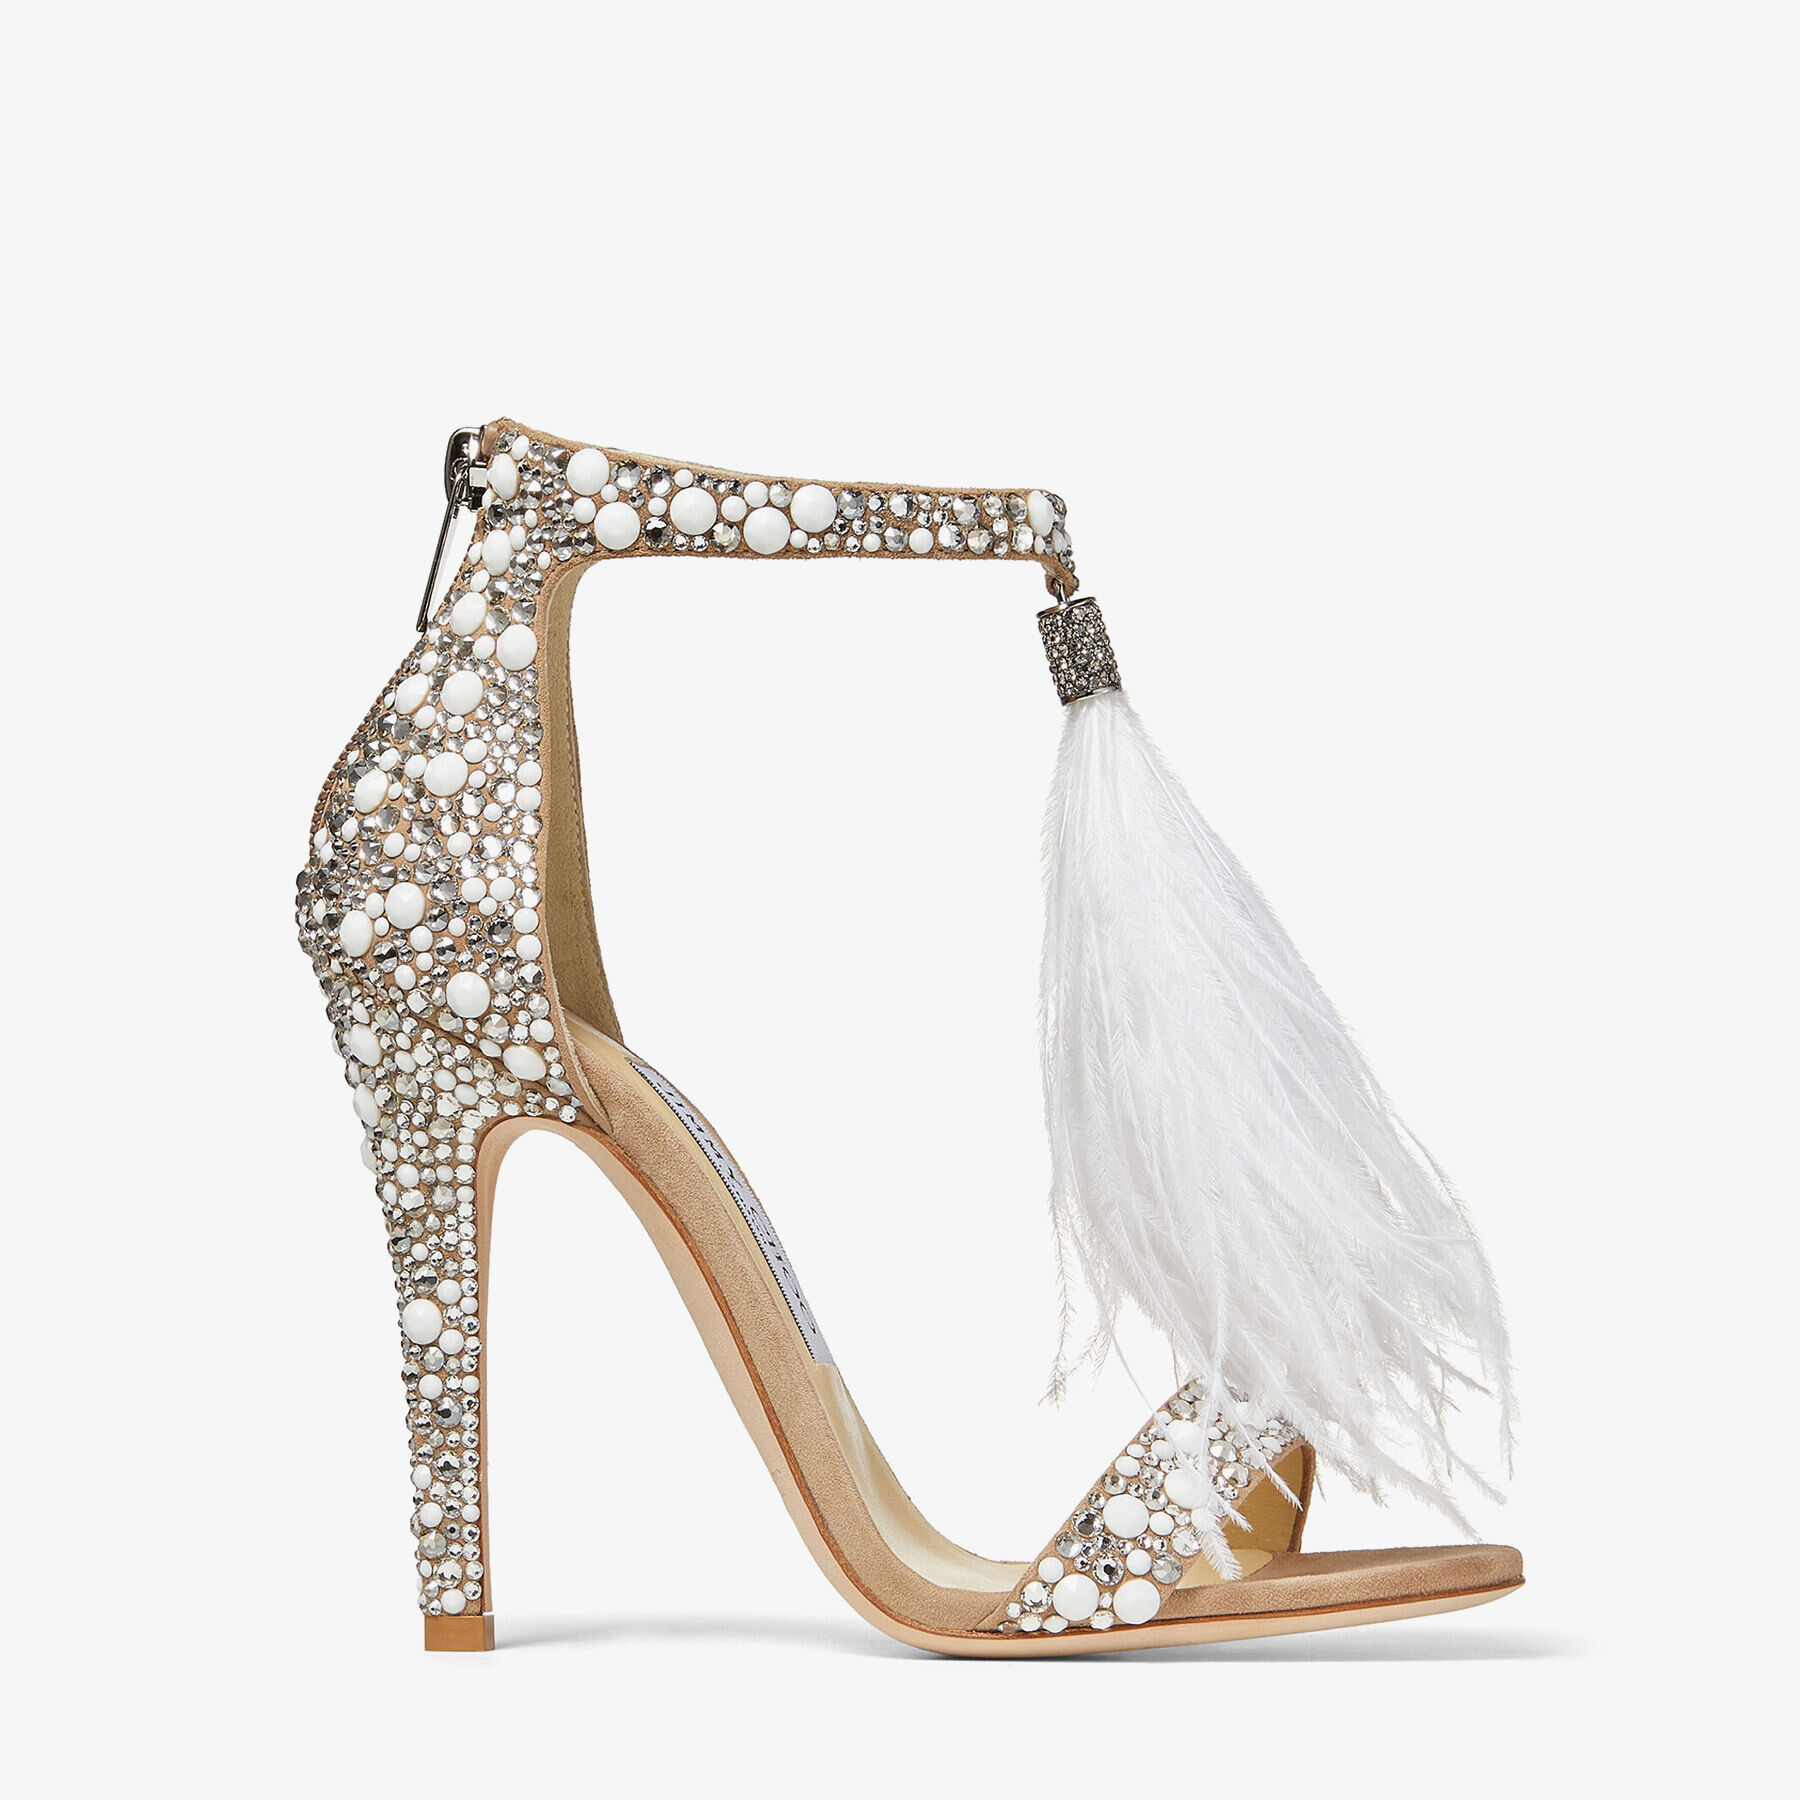 White Suede and Hot Fix Crystal Embellished Sandals with an